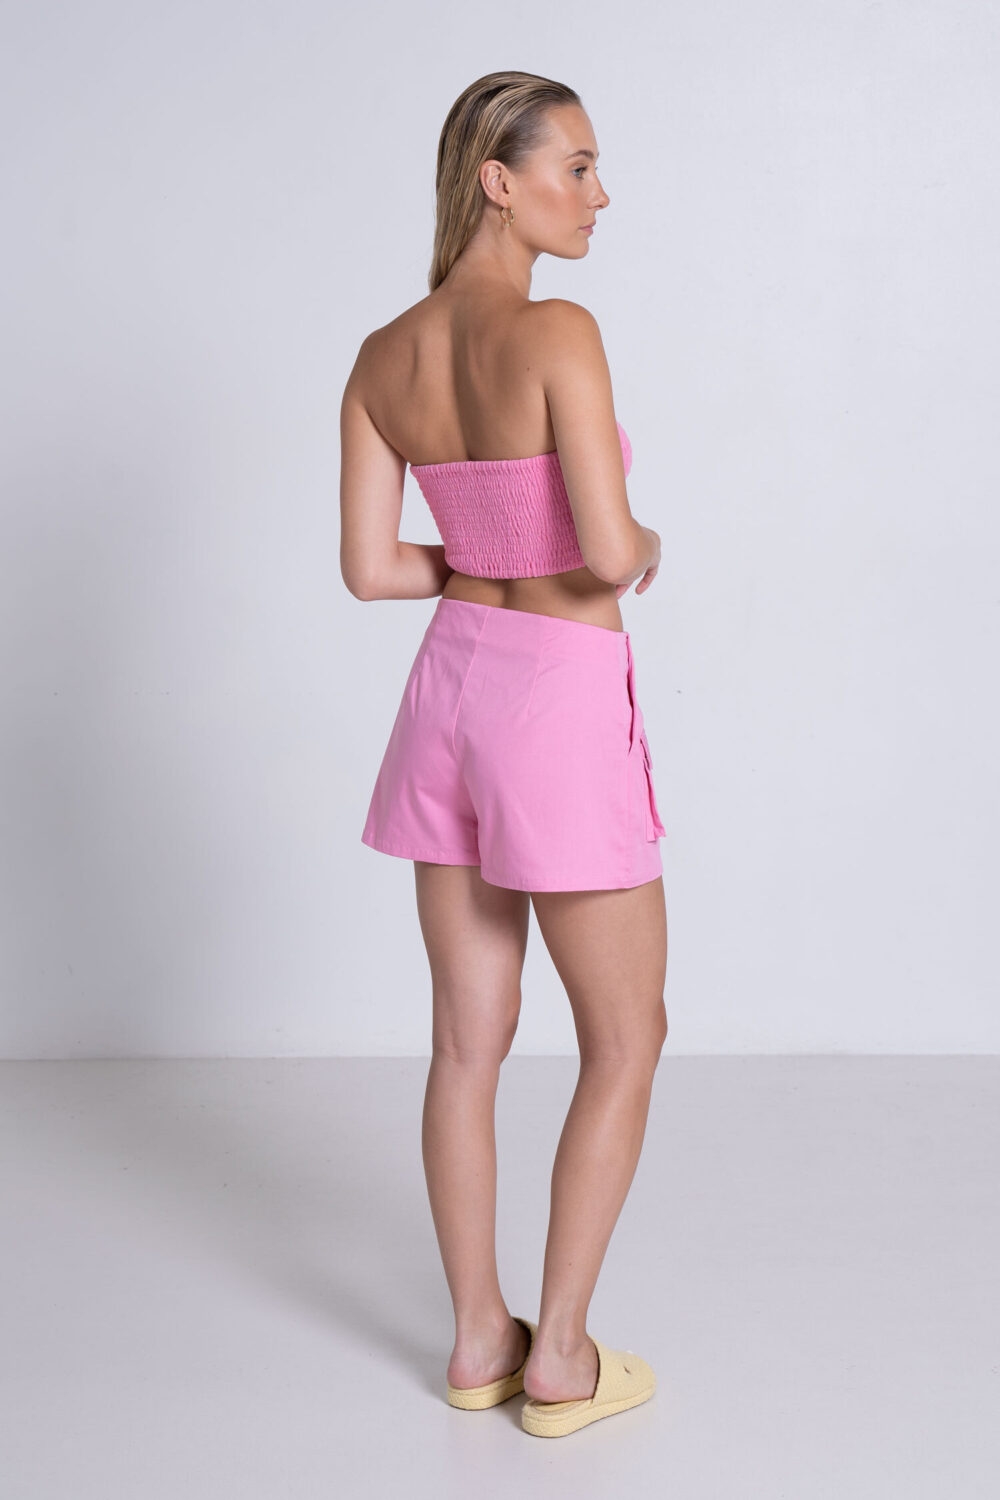 Musk Tube Top Candy Pink - Sentiment Brand